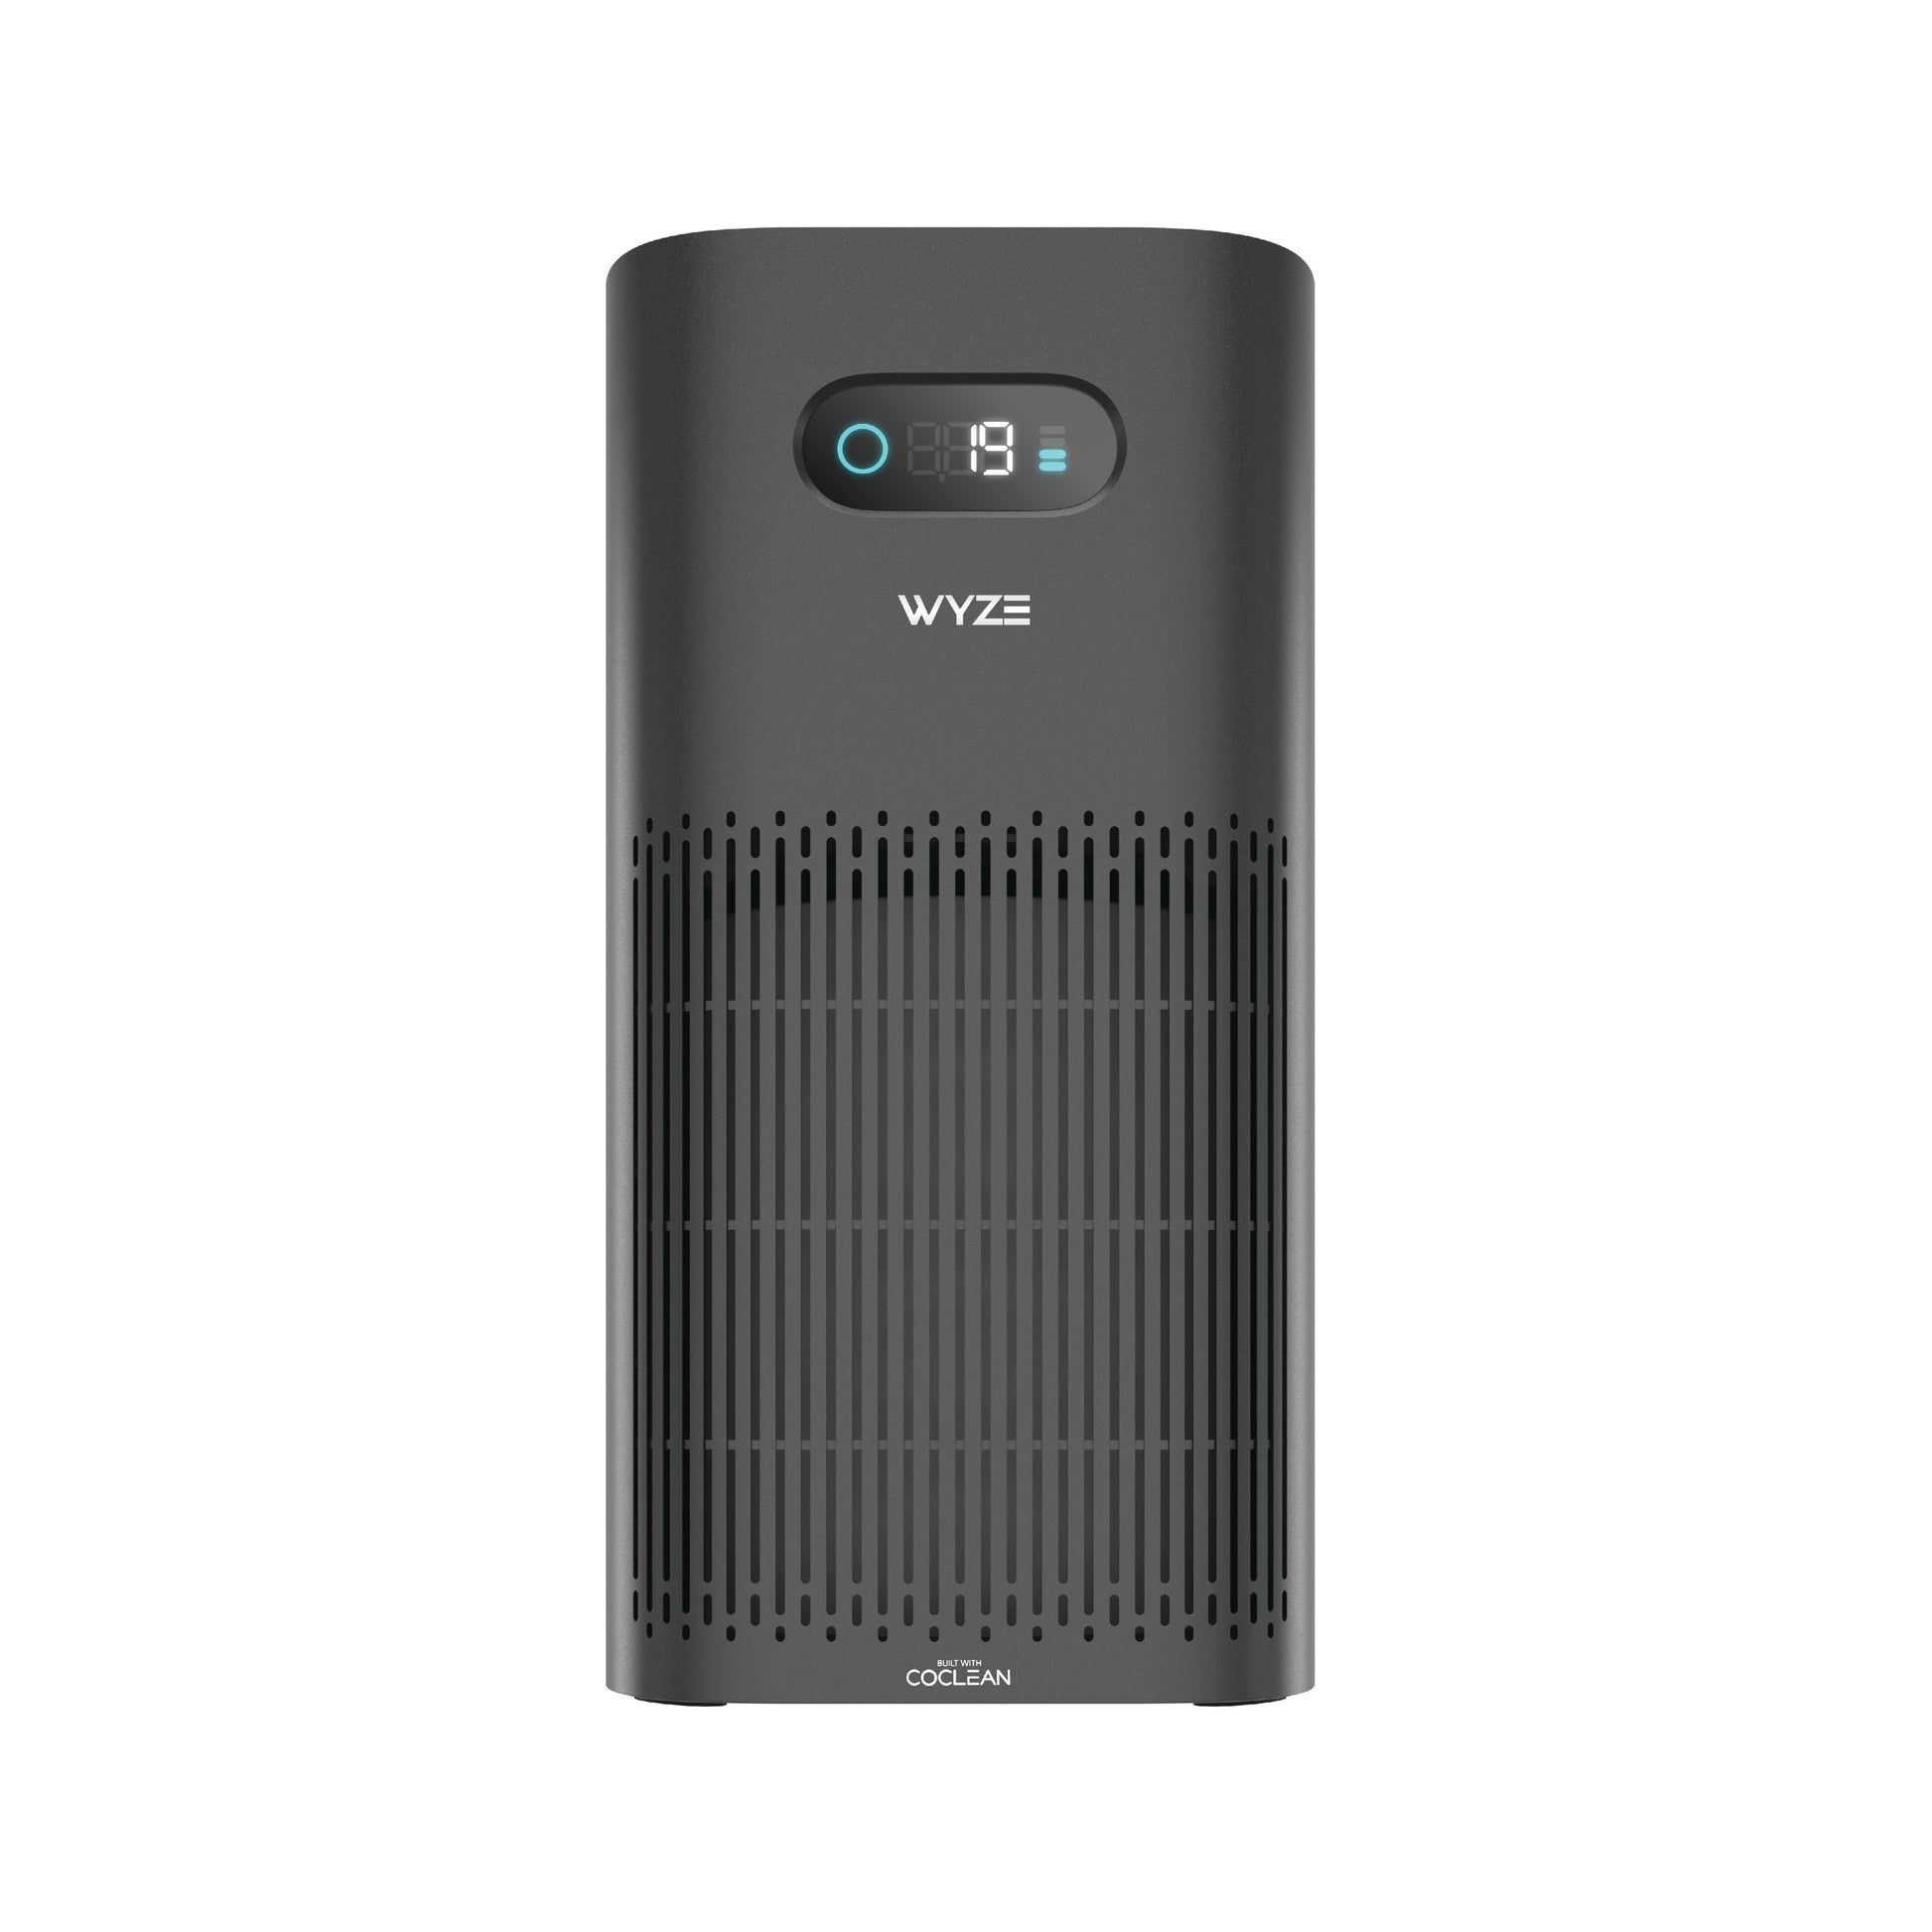 Wyze Air Purifier against a white background.